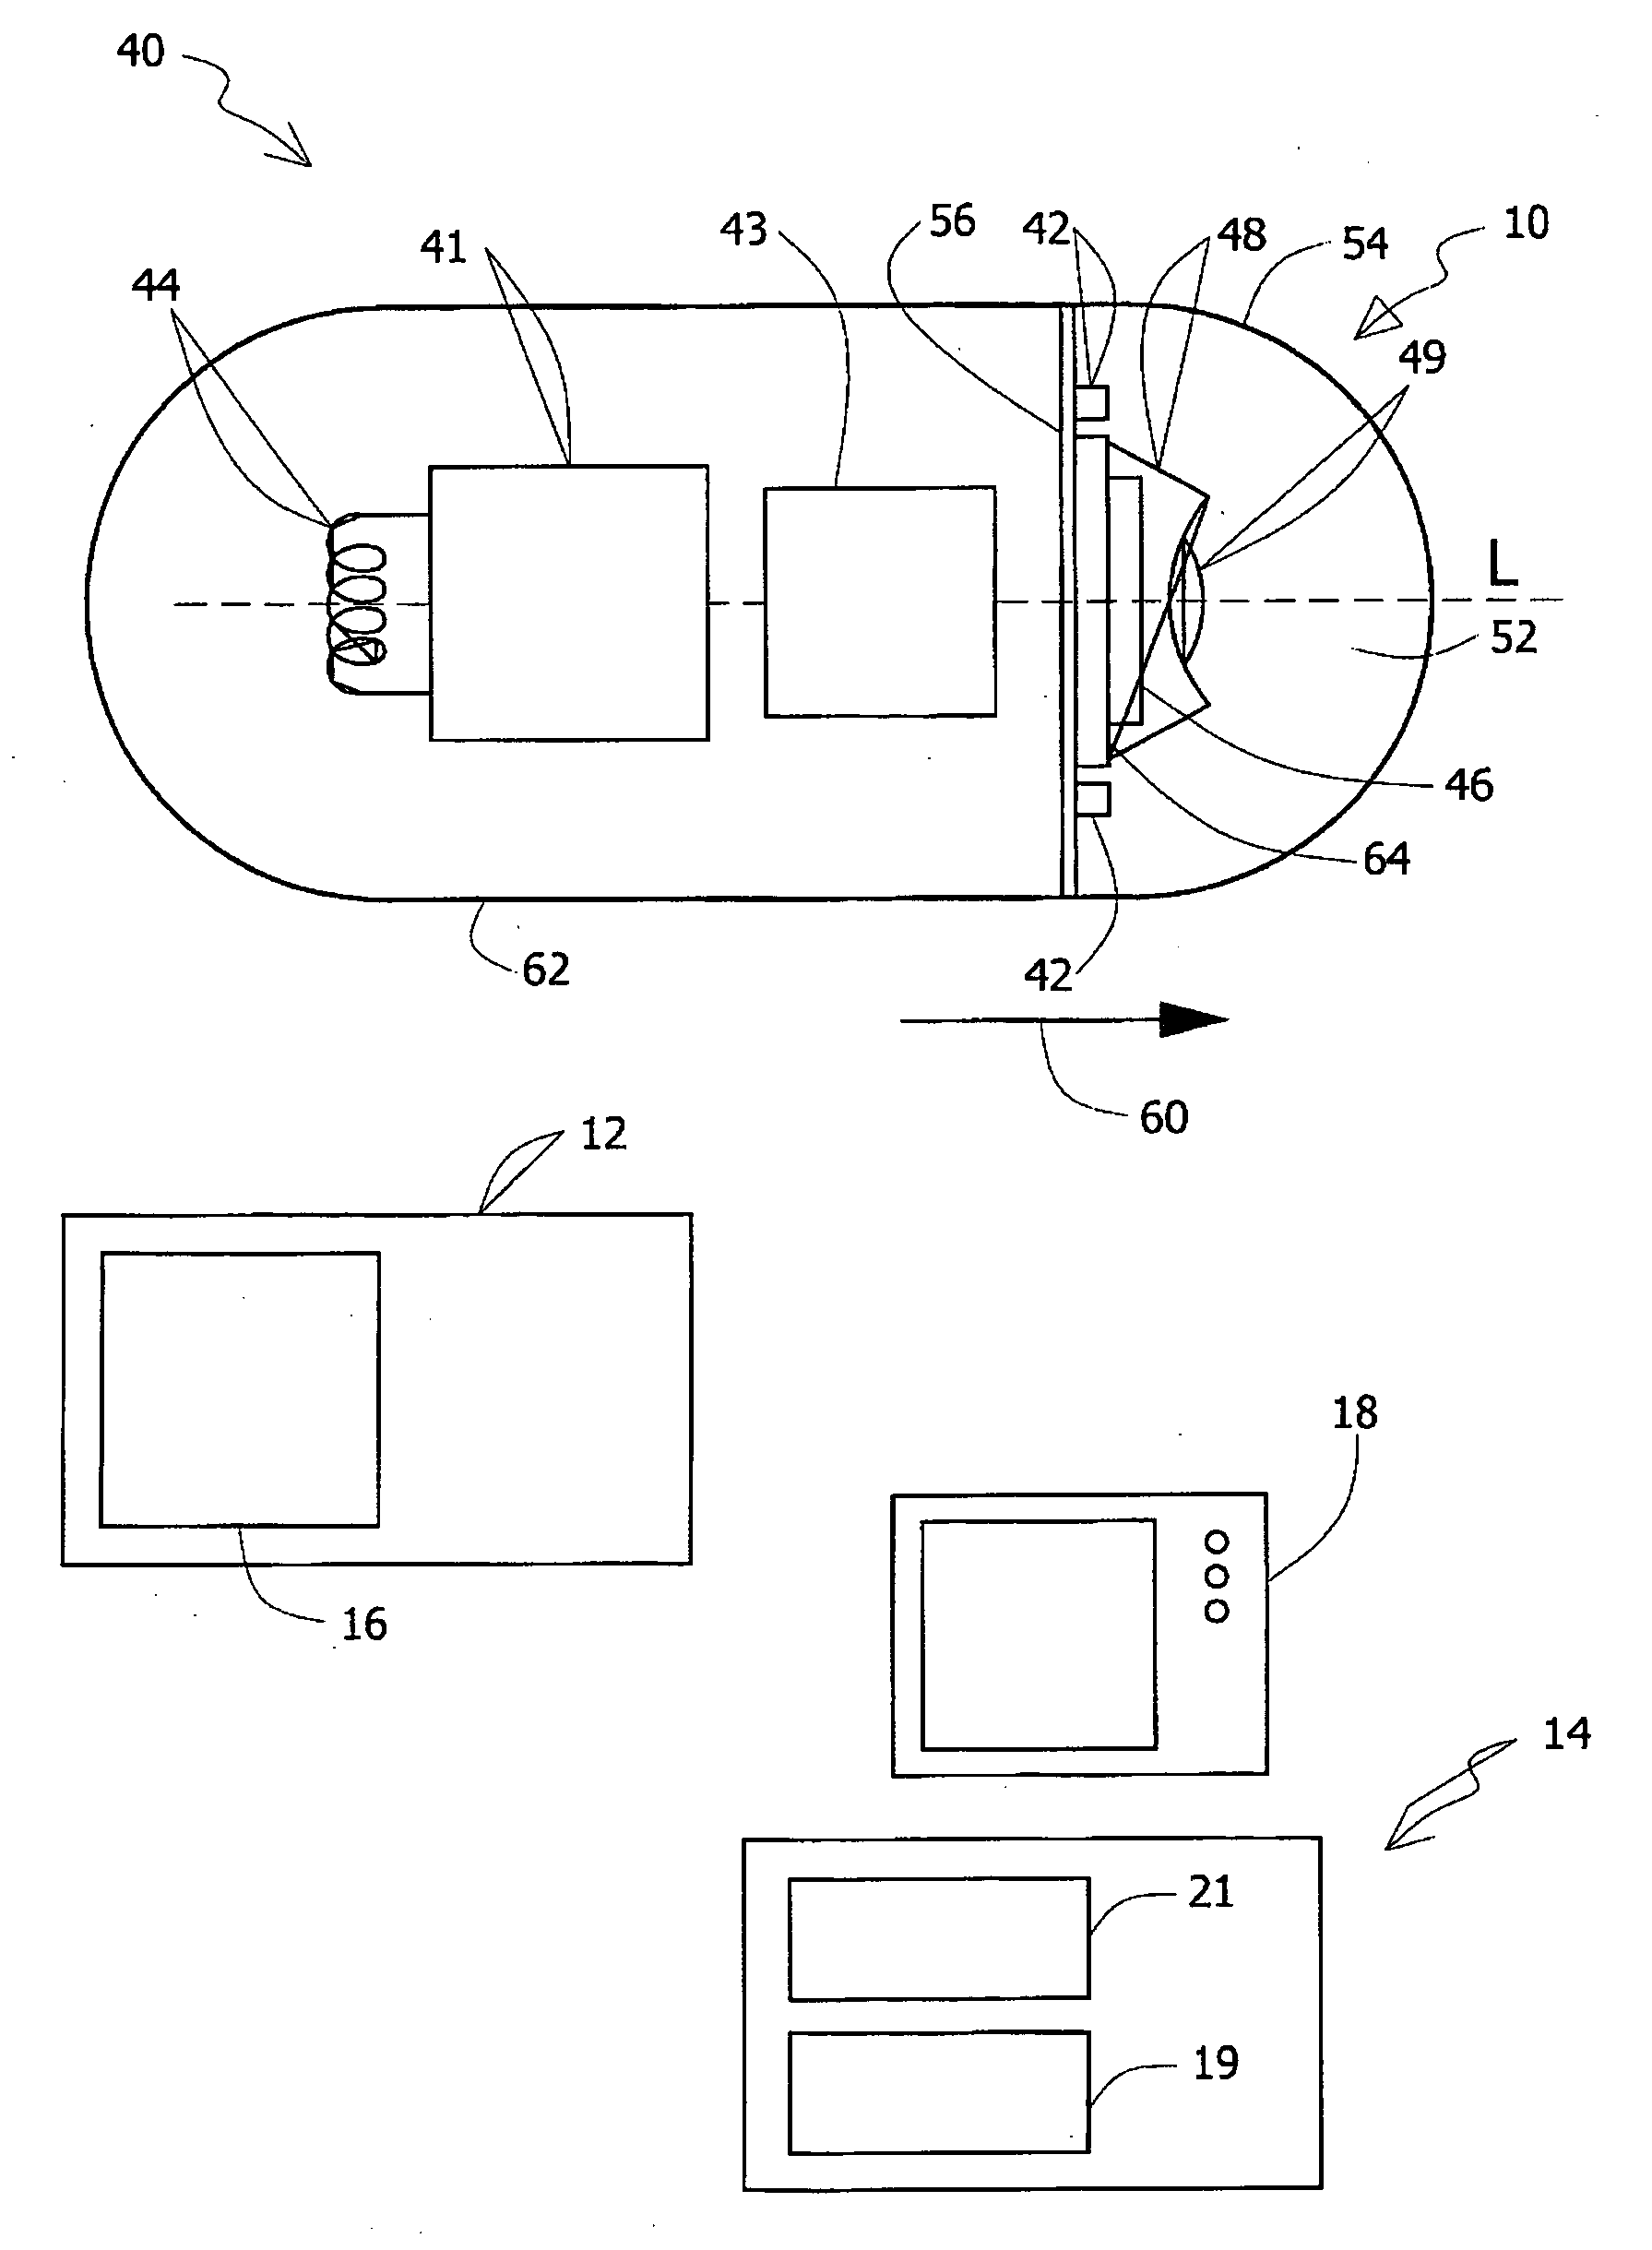 In-vivo imaging device, optical system and method